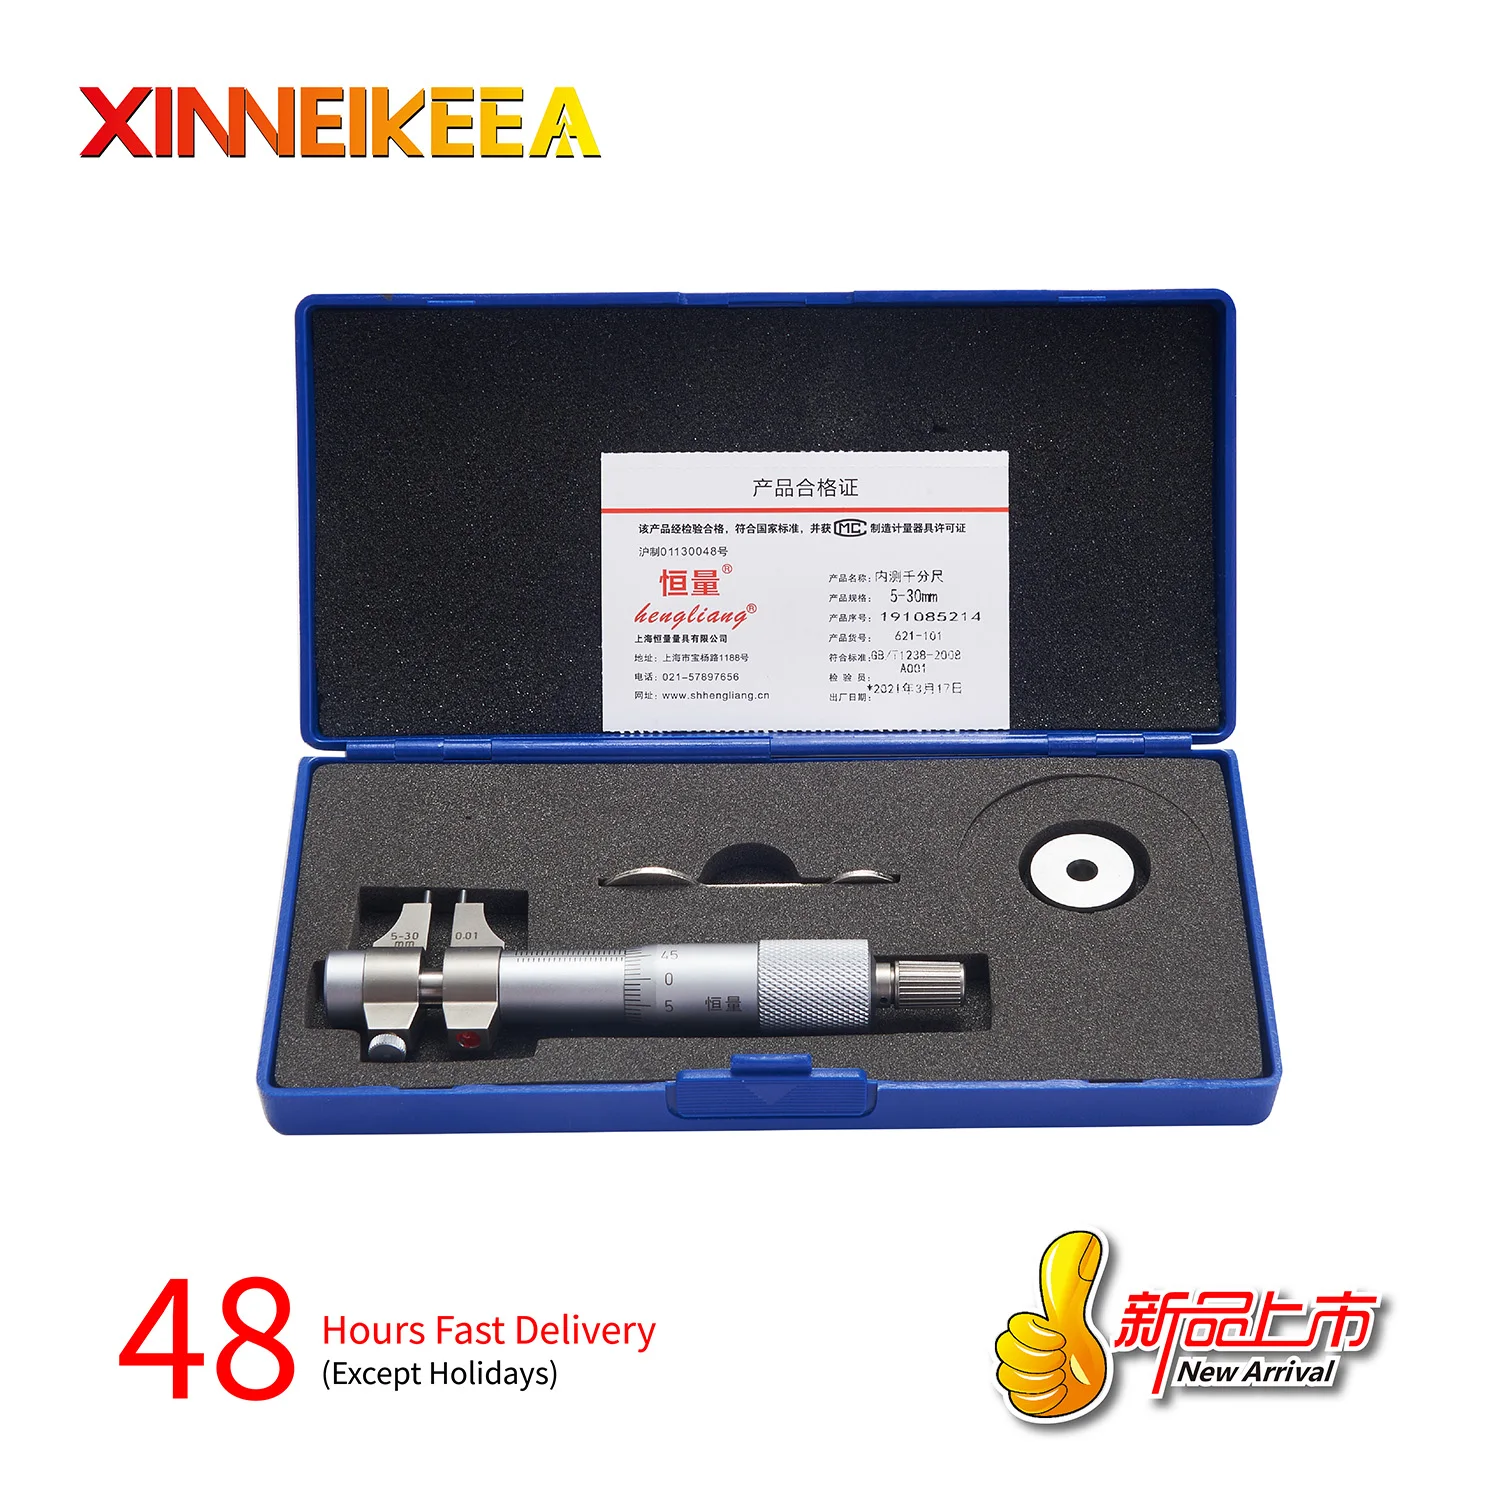 New High Precision Stainless Steel Internal Micrometer Ratchet Force Measuring Device Measuring Range 5-30 25-50 50-75 75-100